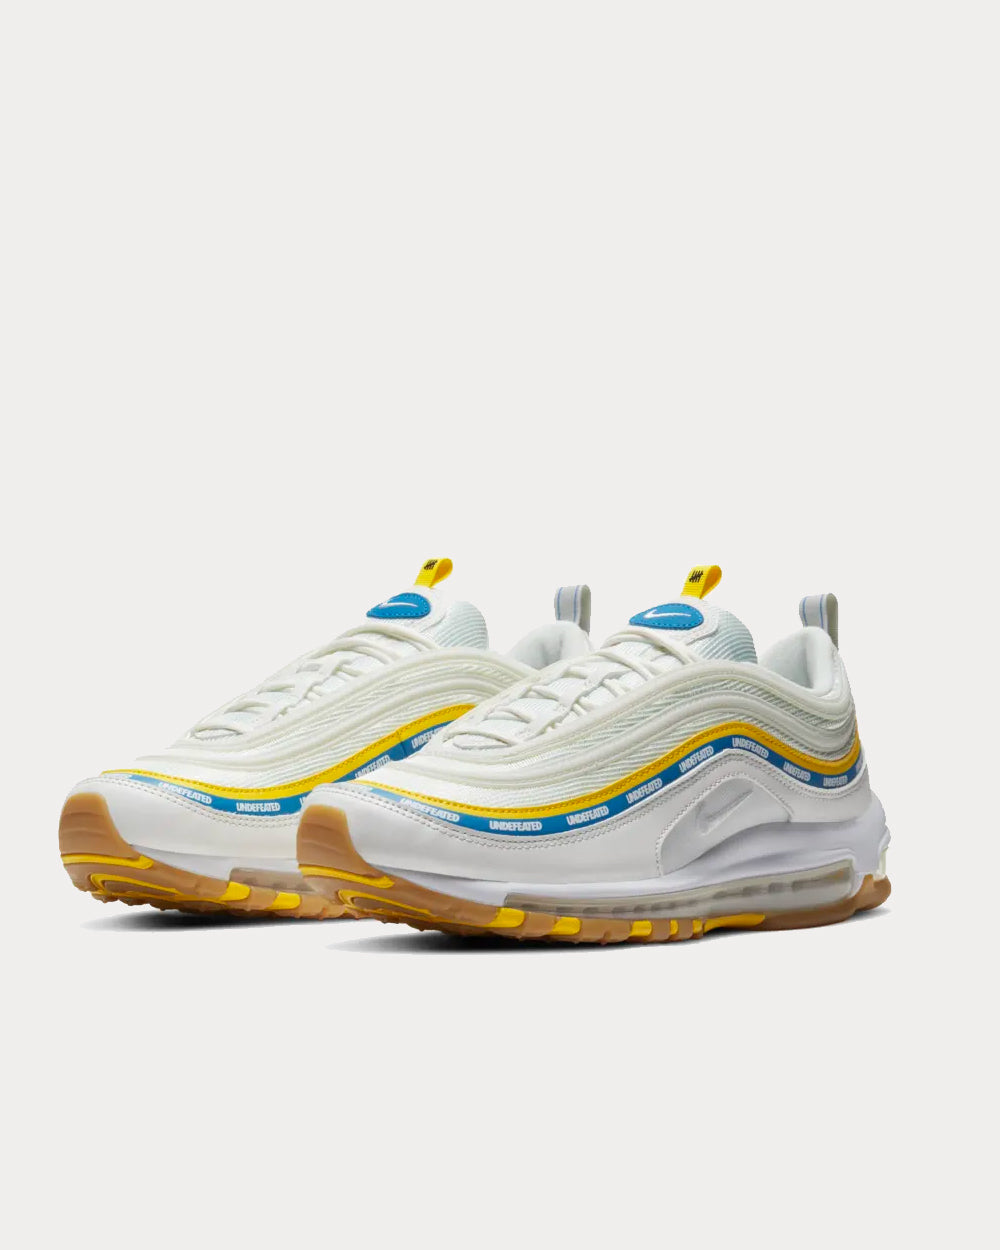 Nike x UNDFTD - Air Max 97 White Low Top Sneakers